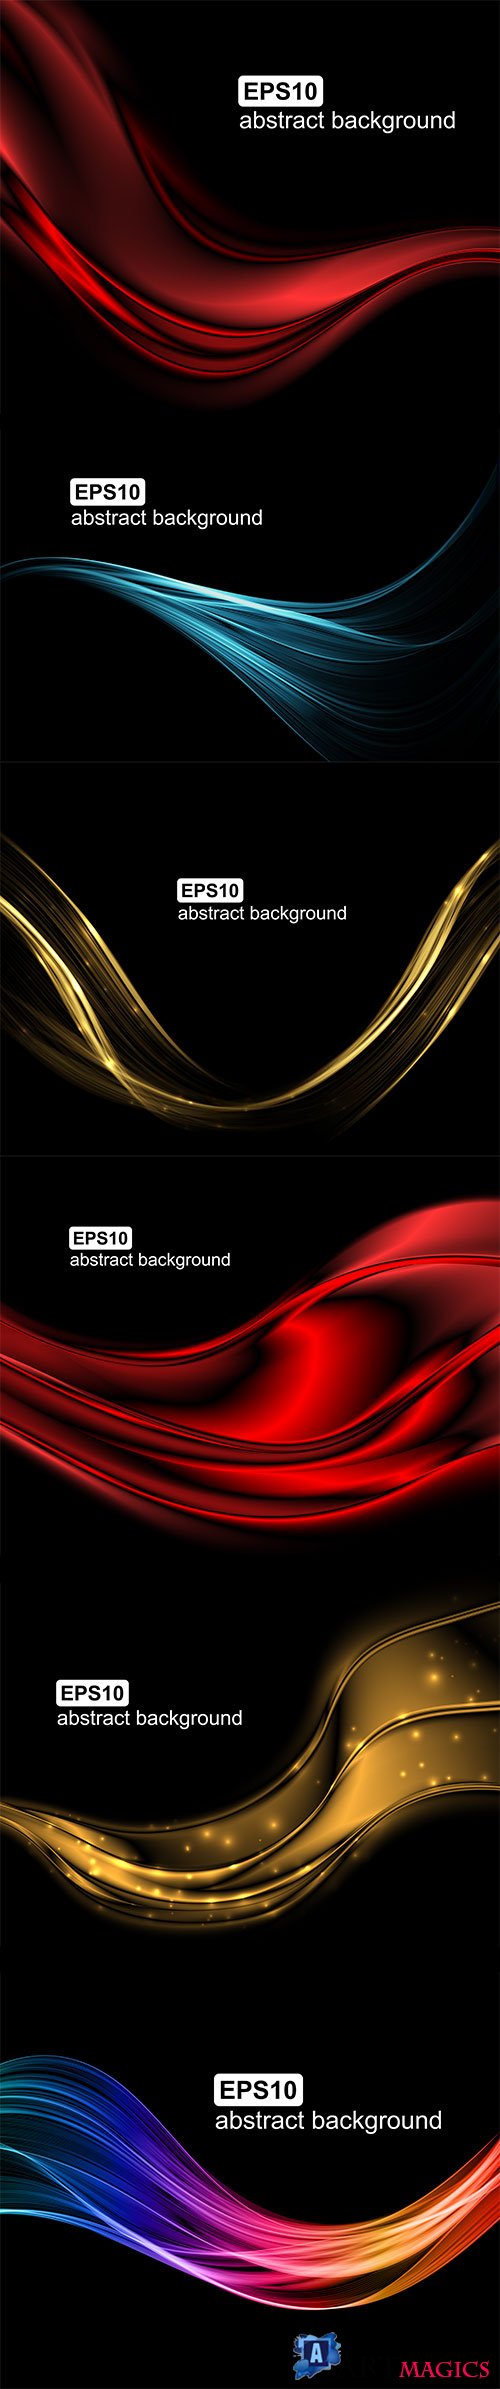 Abstract light wave futuristic background, design for vector illustration